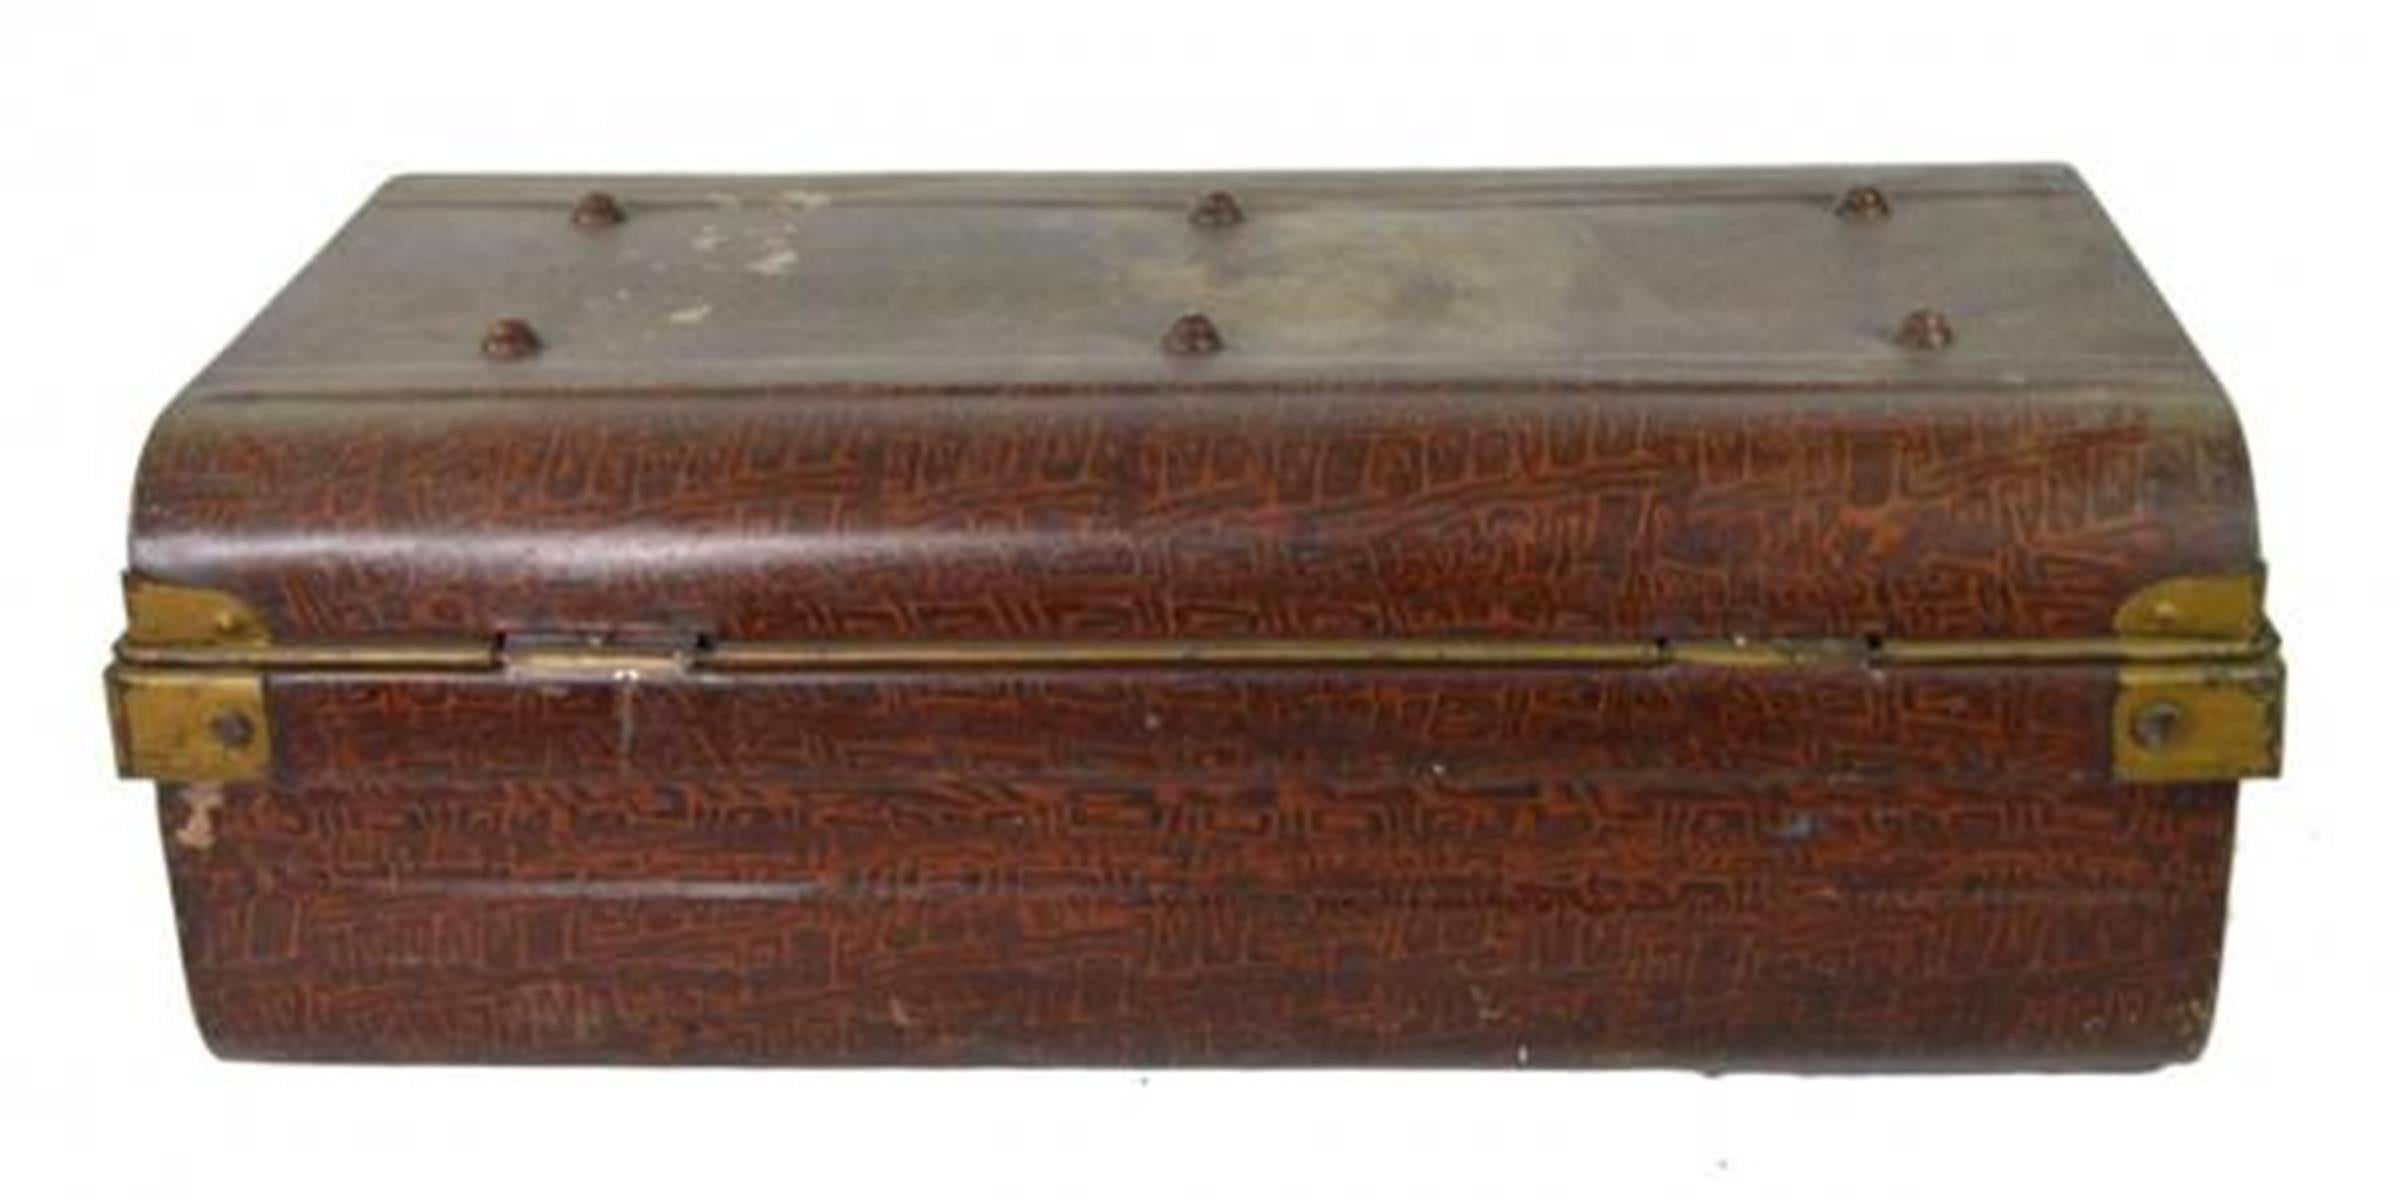 Antique British Wilkes & Son Locked Metal Trunk for Export, circa 1800 For Sale 1